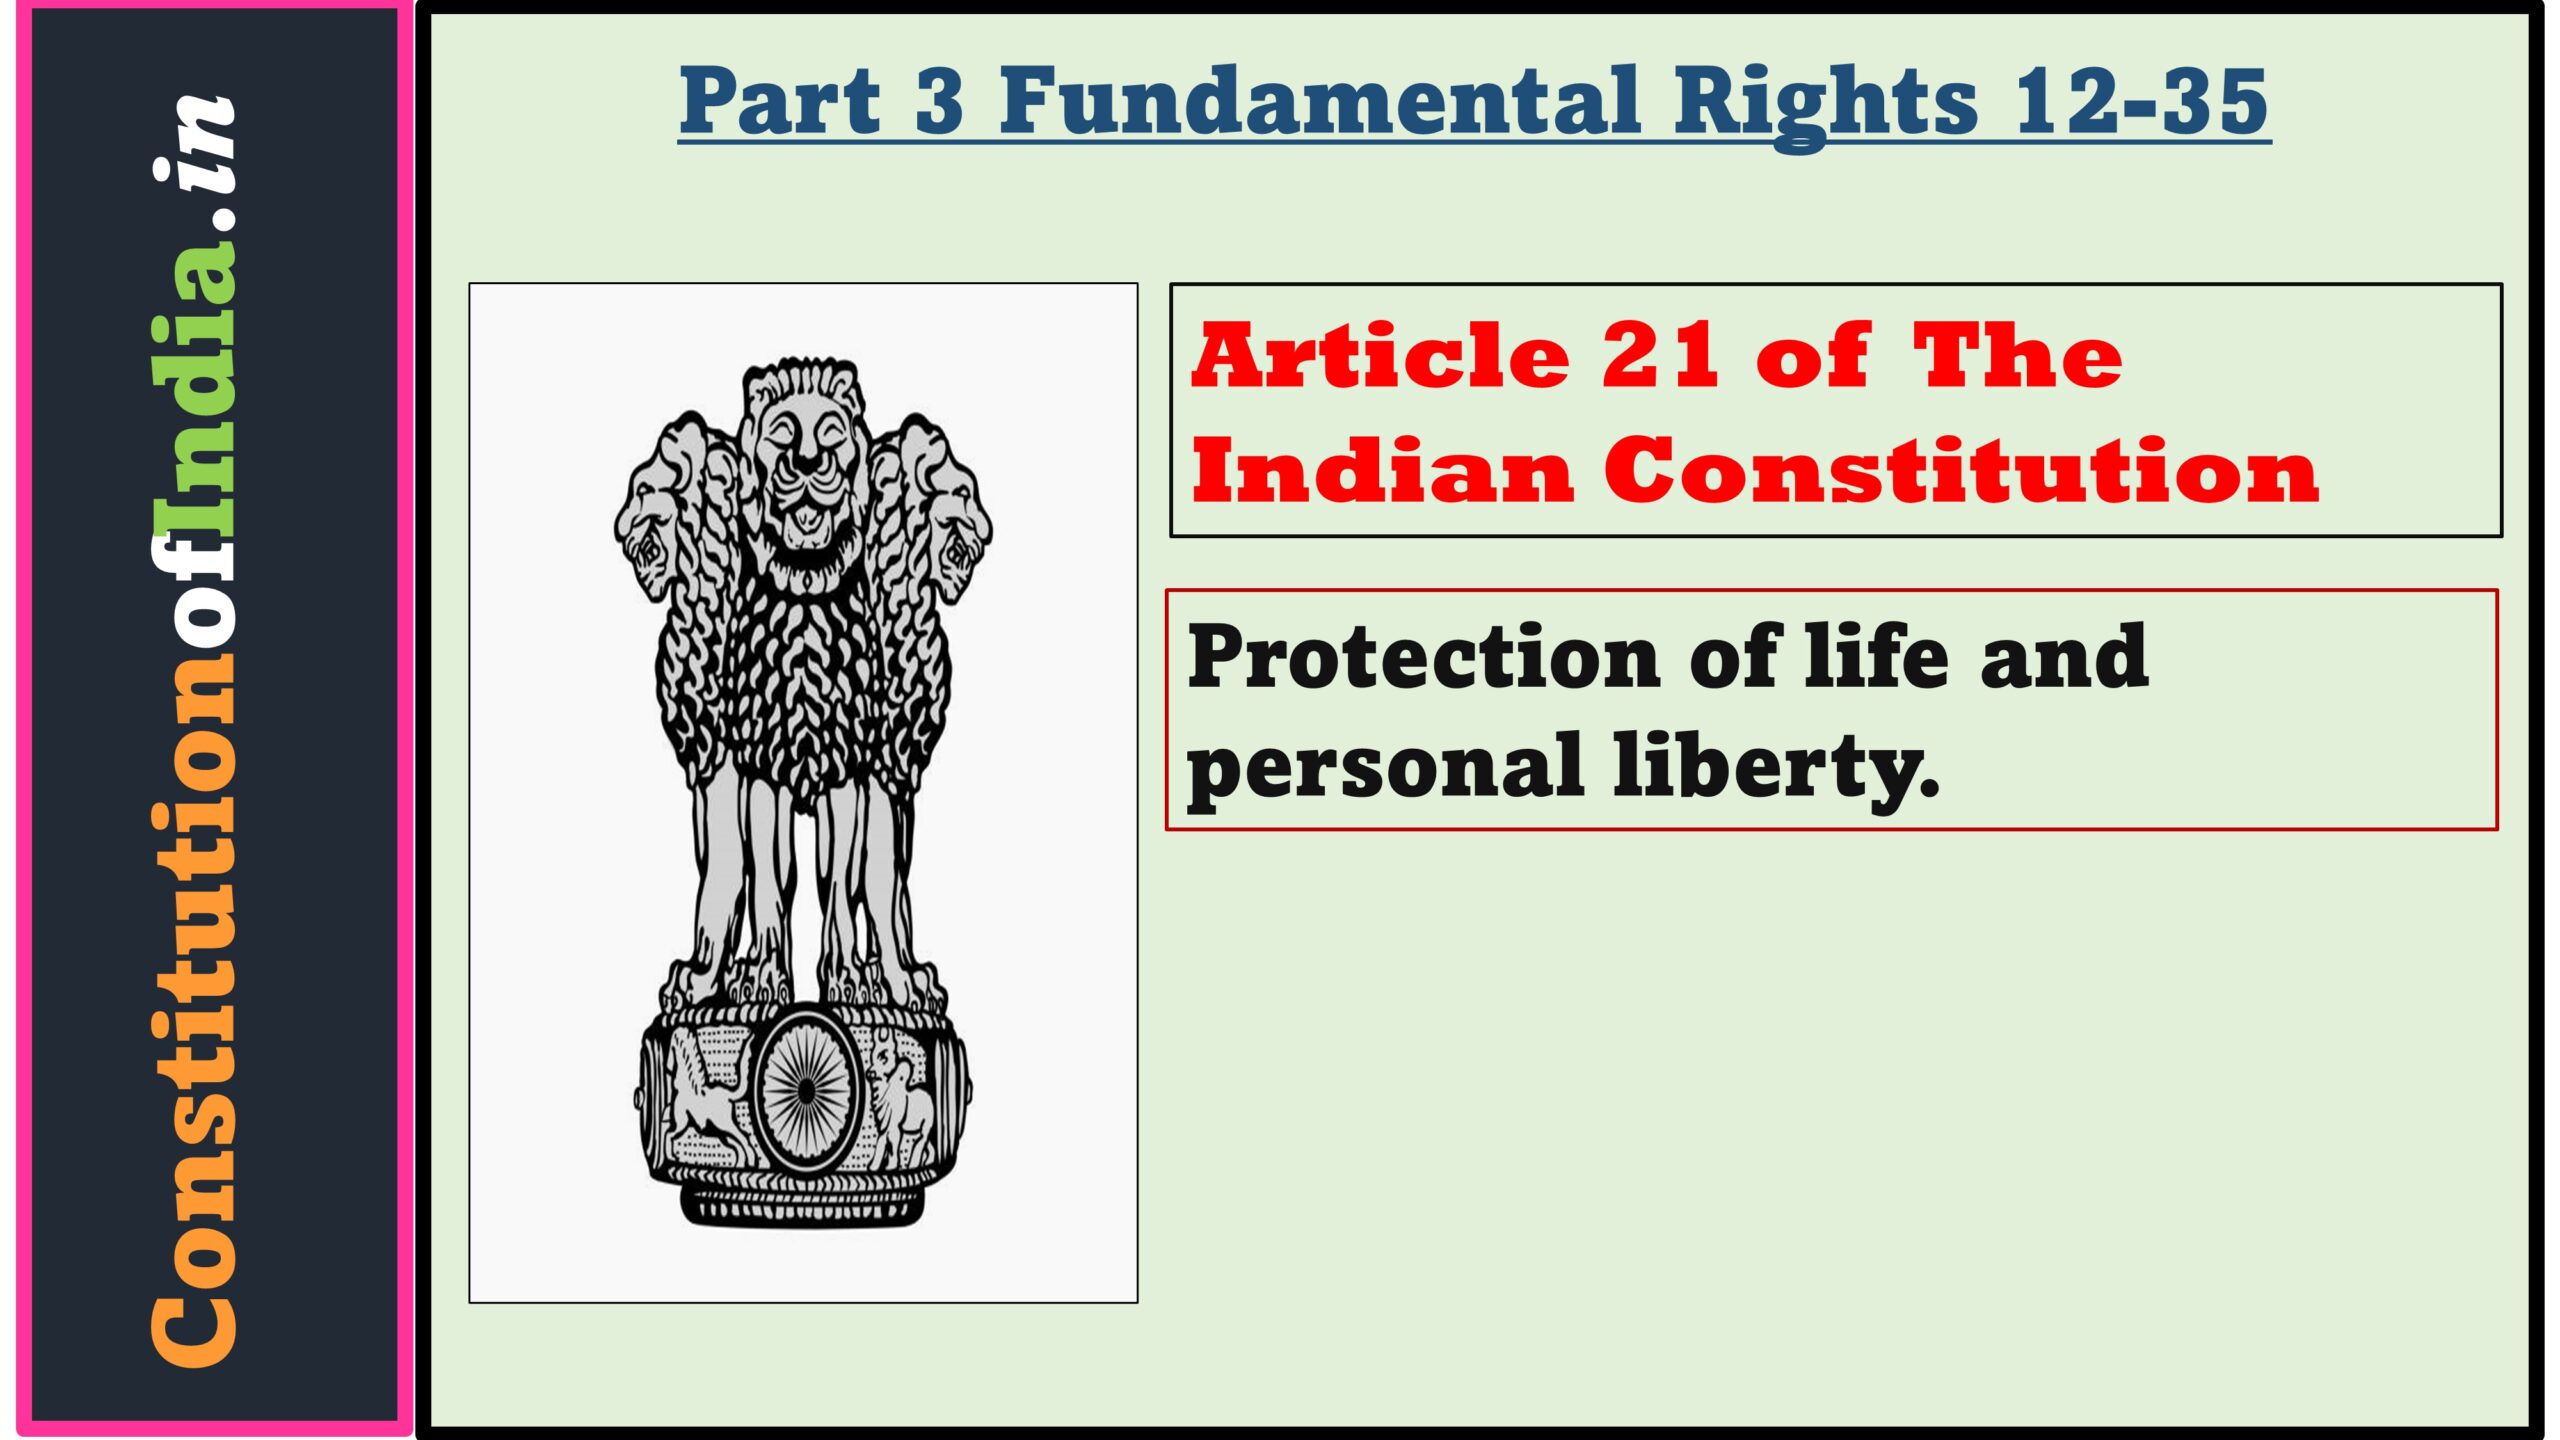 Article 21 of Indian Constitution